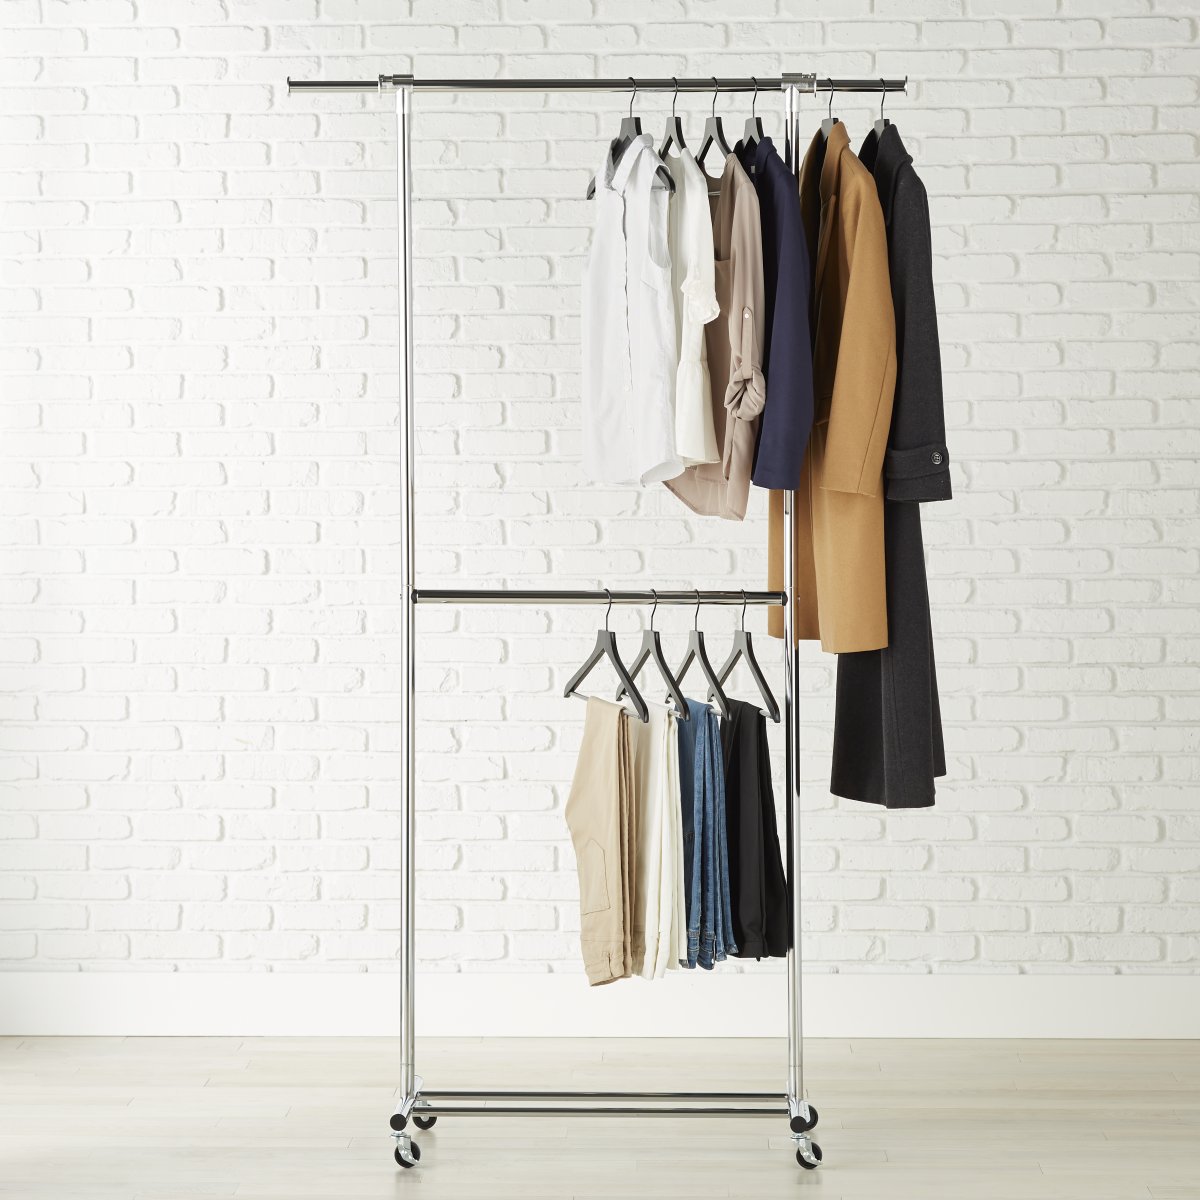 Double Hang Chrome Garment Rack | The Container Store